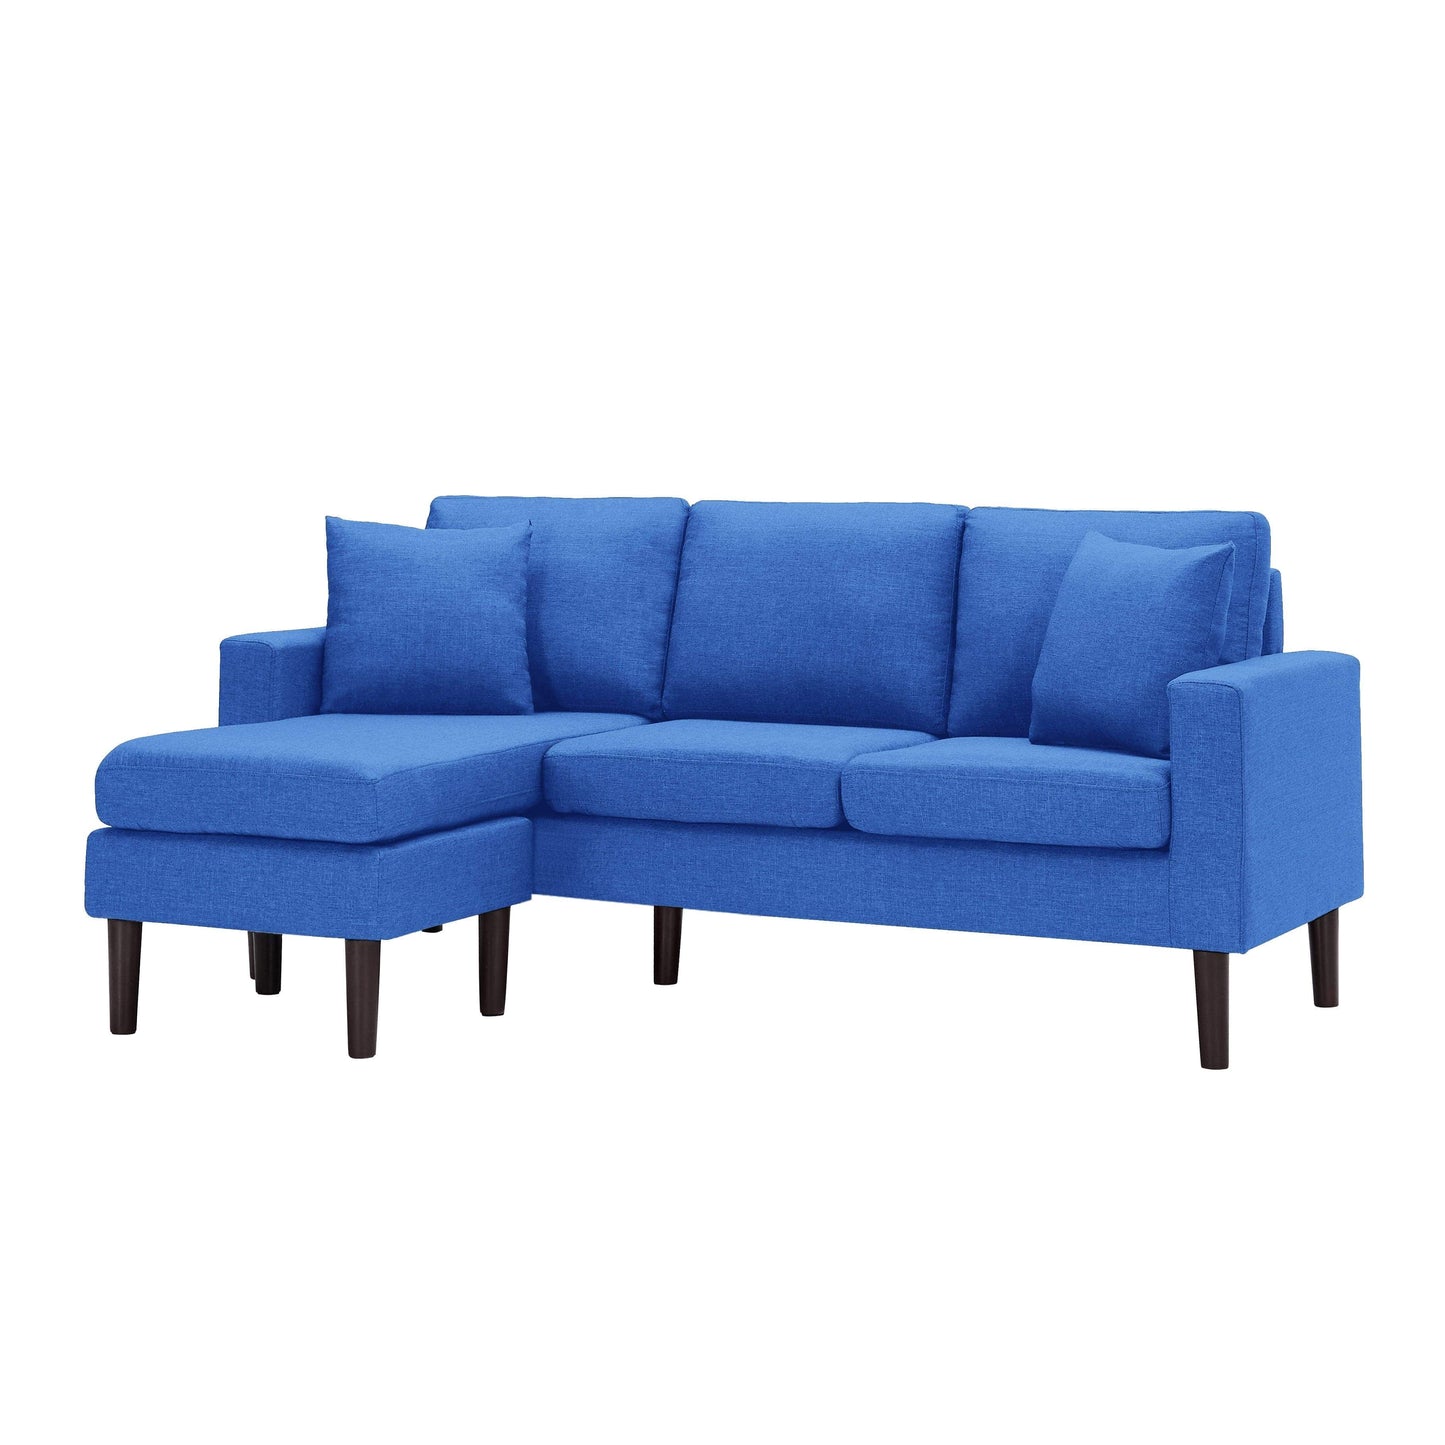 TFC&H Co. 72" SECTIONAL SOFA LEFT HAND FACING W/ 2 PILLOWS - Blue- Ships from The US - sectional at TFC&H Co.